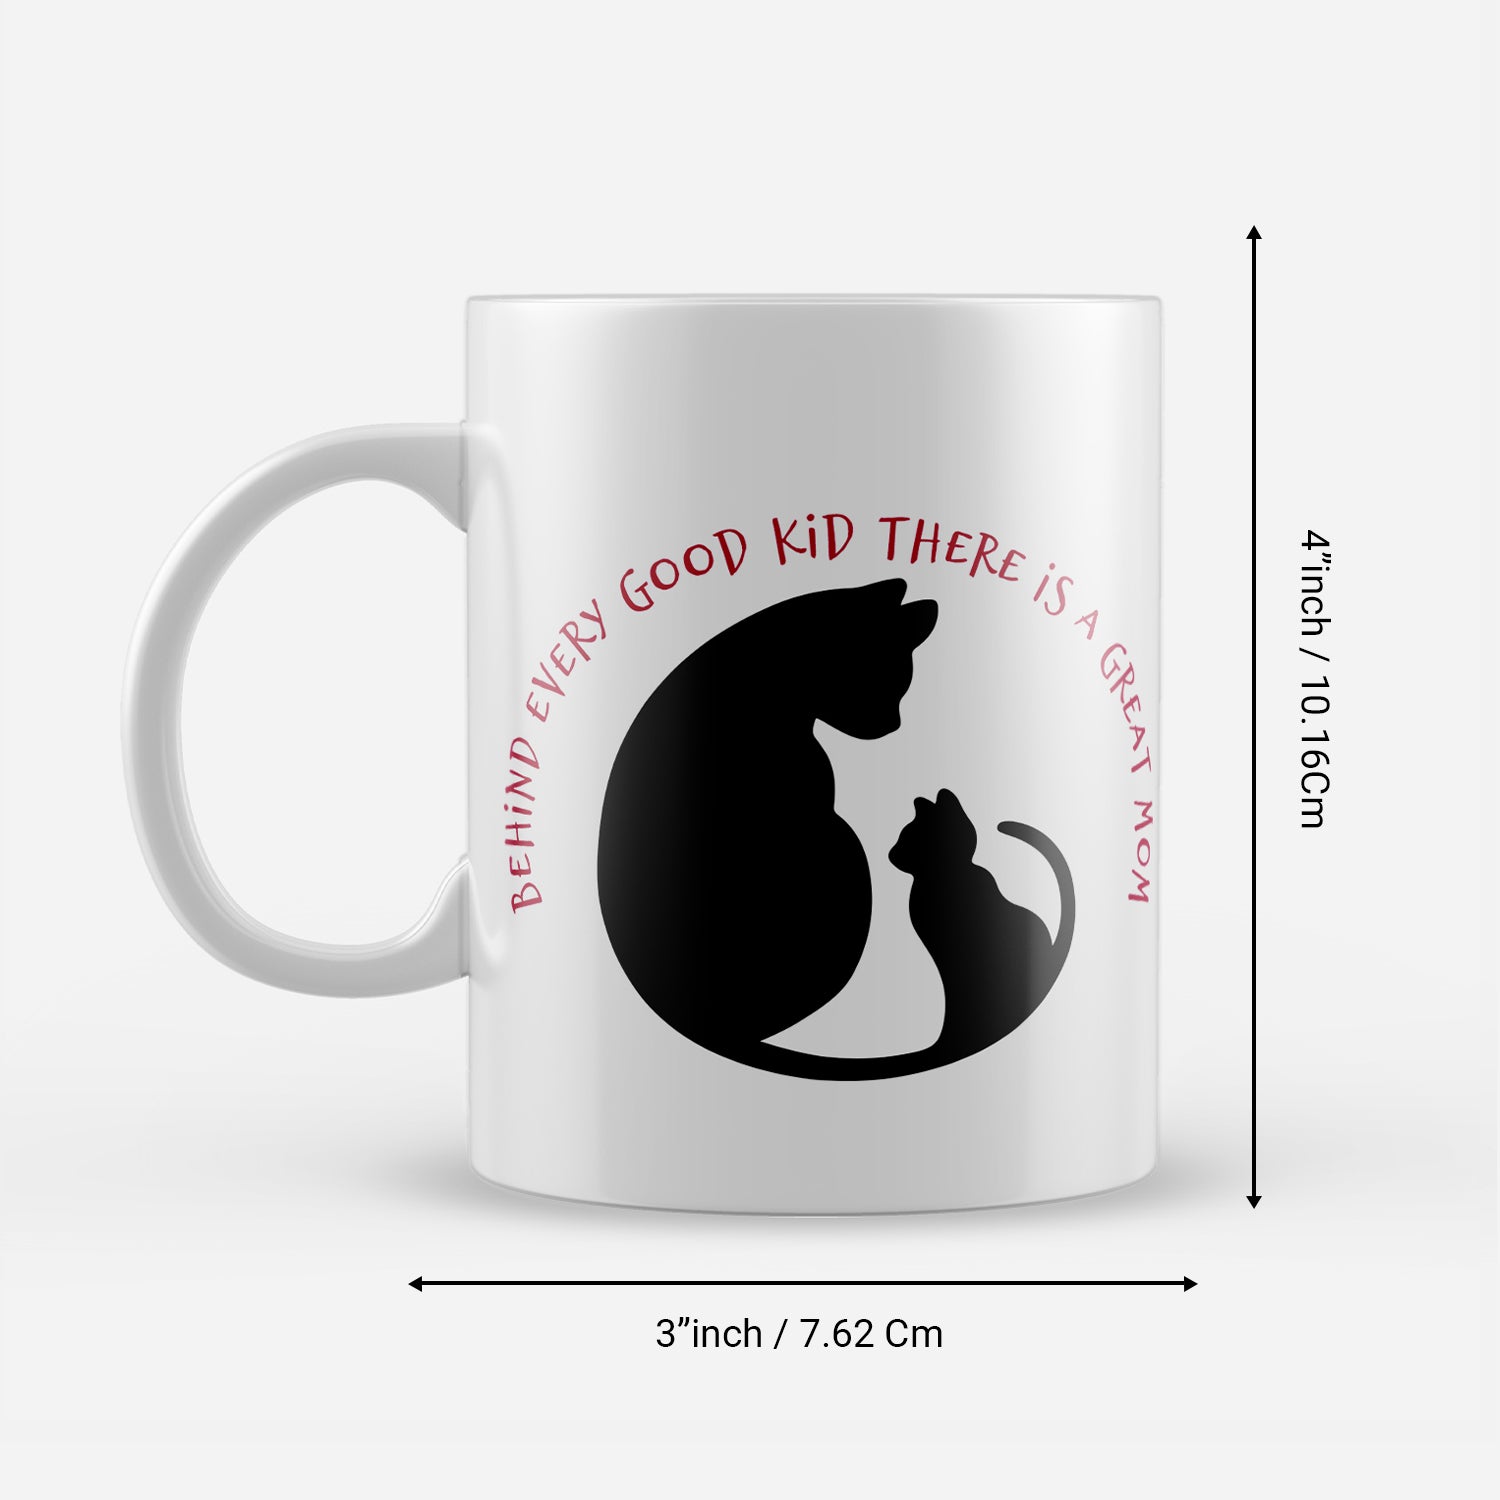 "Behind every good kid there is a great mom" Mother's Day theme Ceramic Coffee Mugs 3